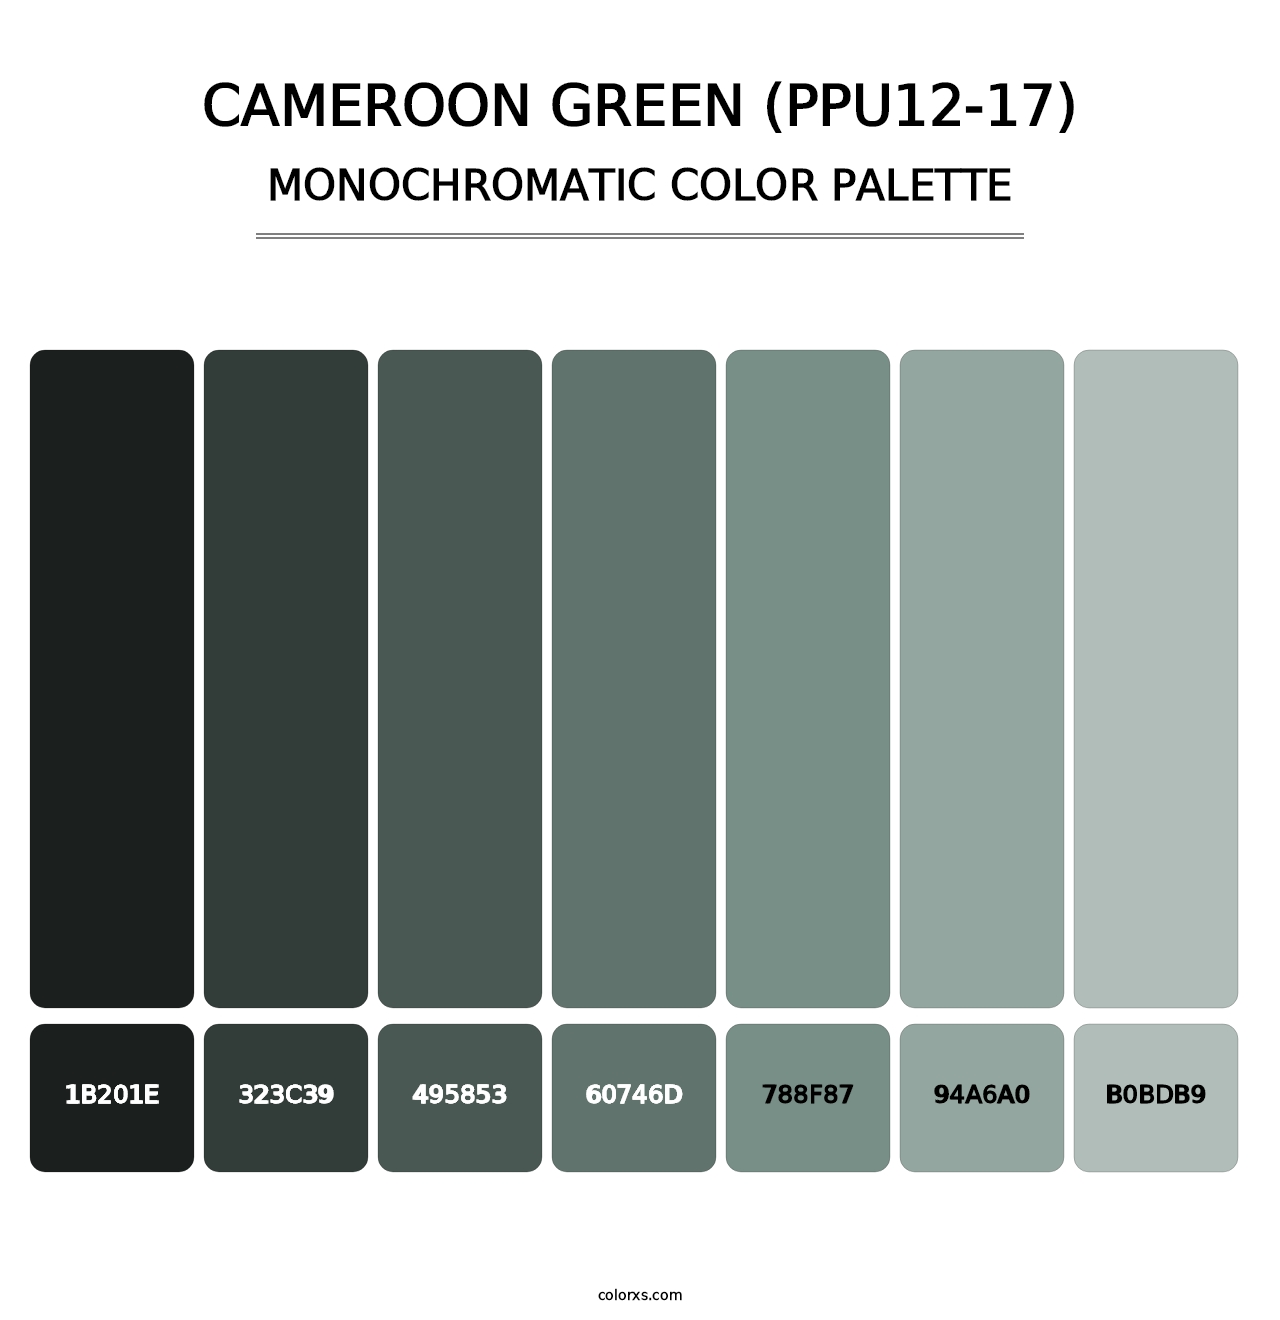 Cameroon Green (PPU12-17) - Monochromatic Color Palette